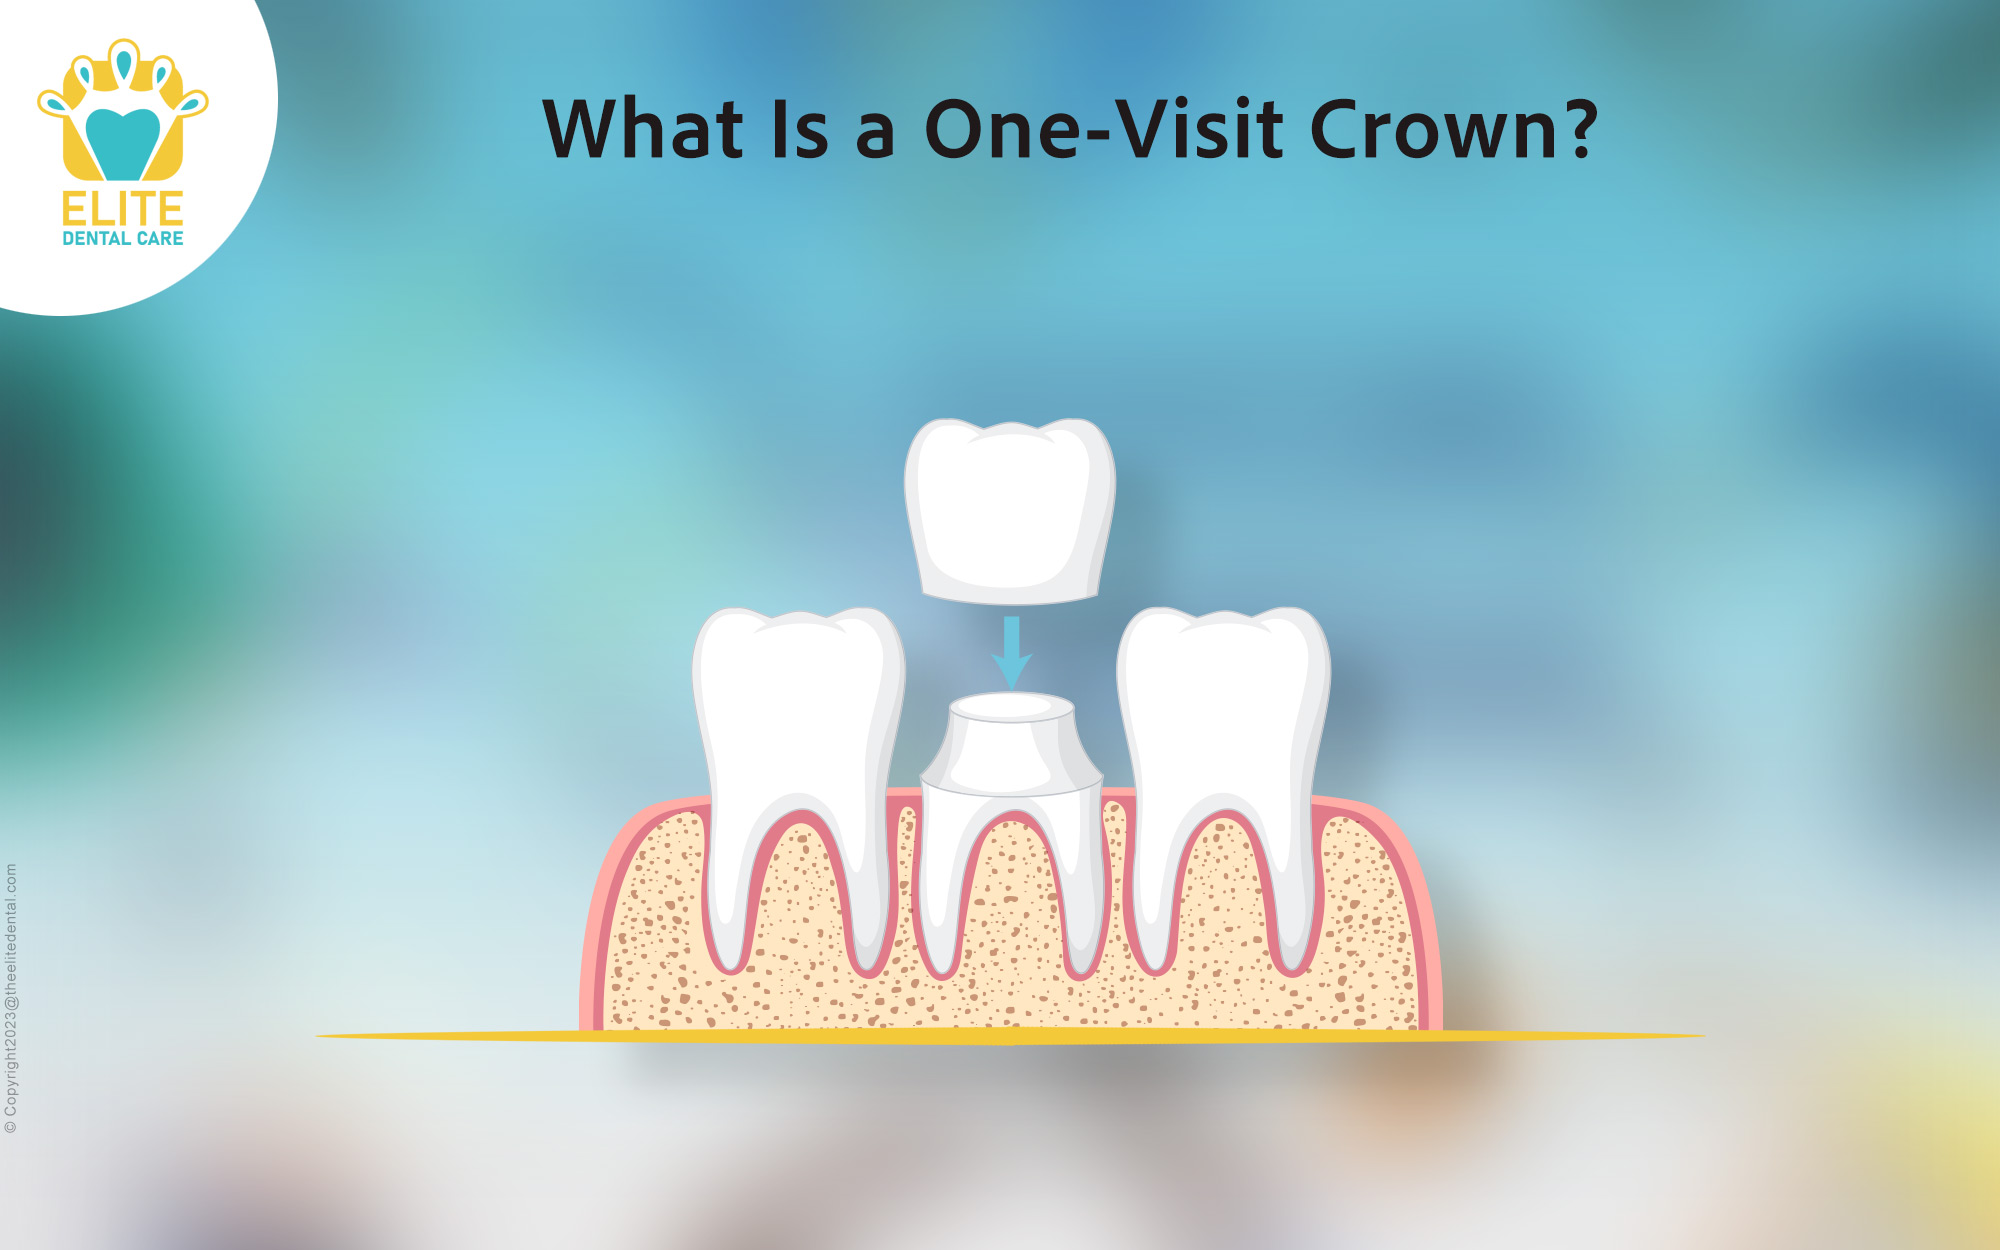 What is One-Visit Crown?